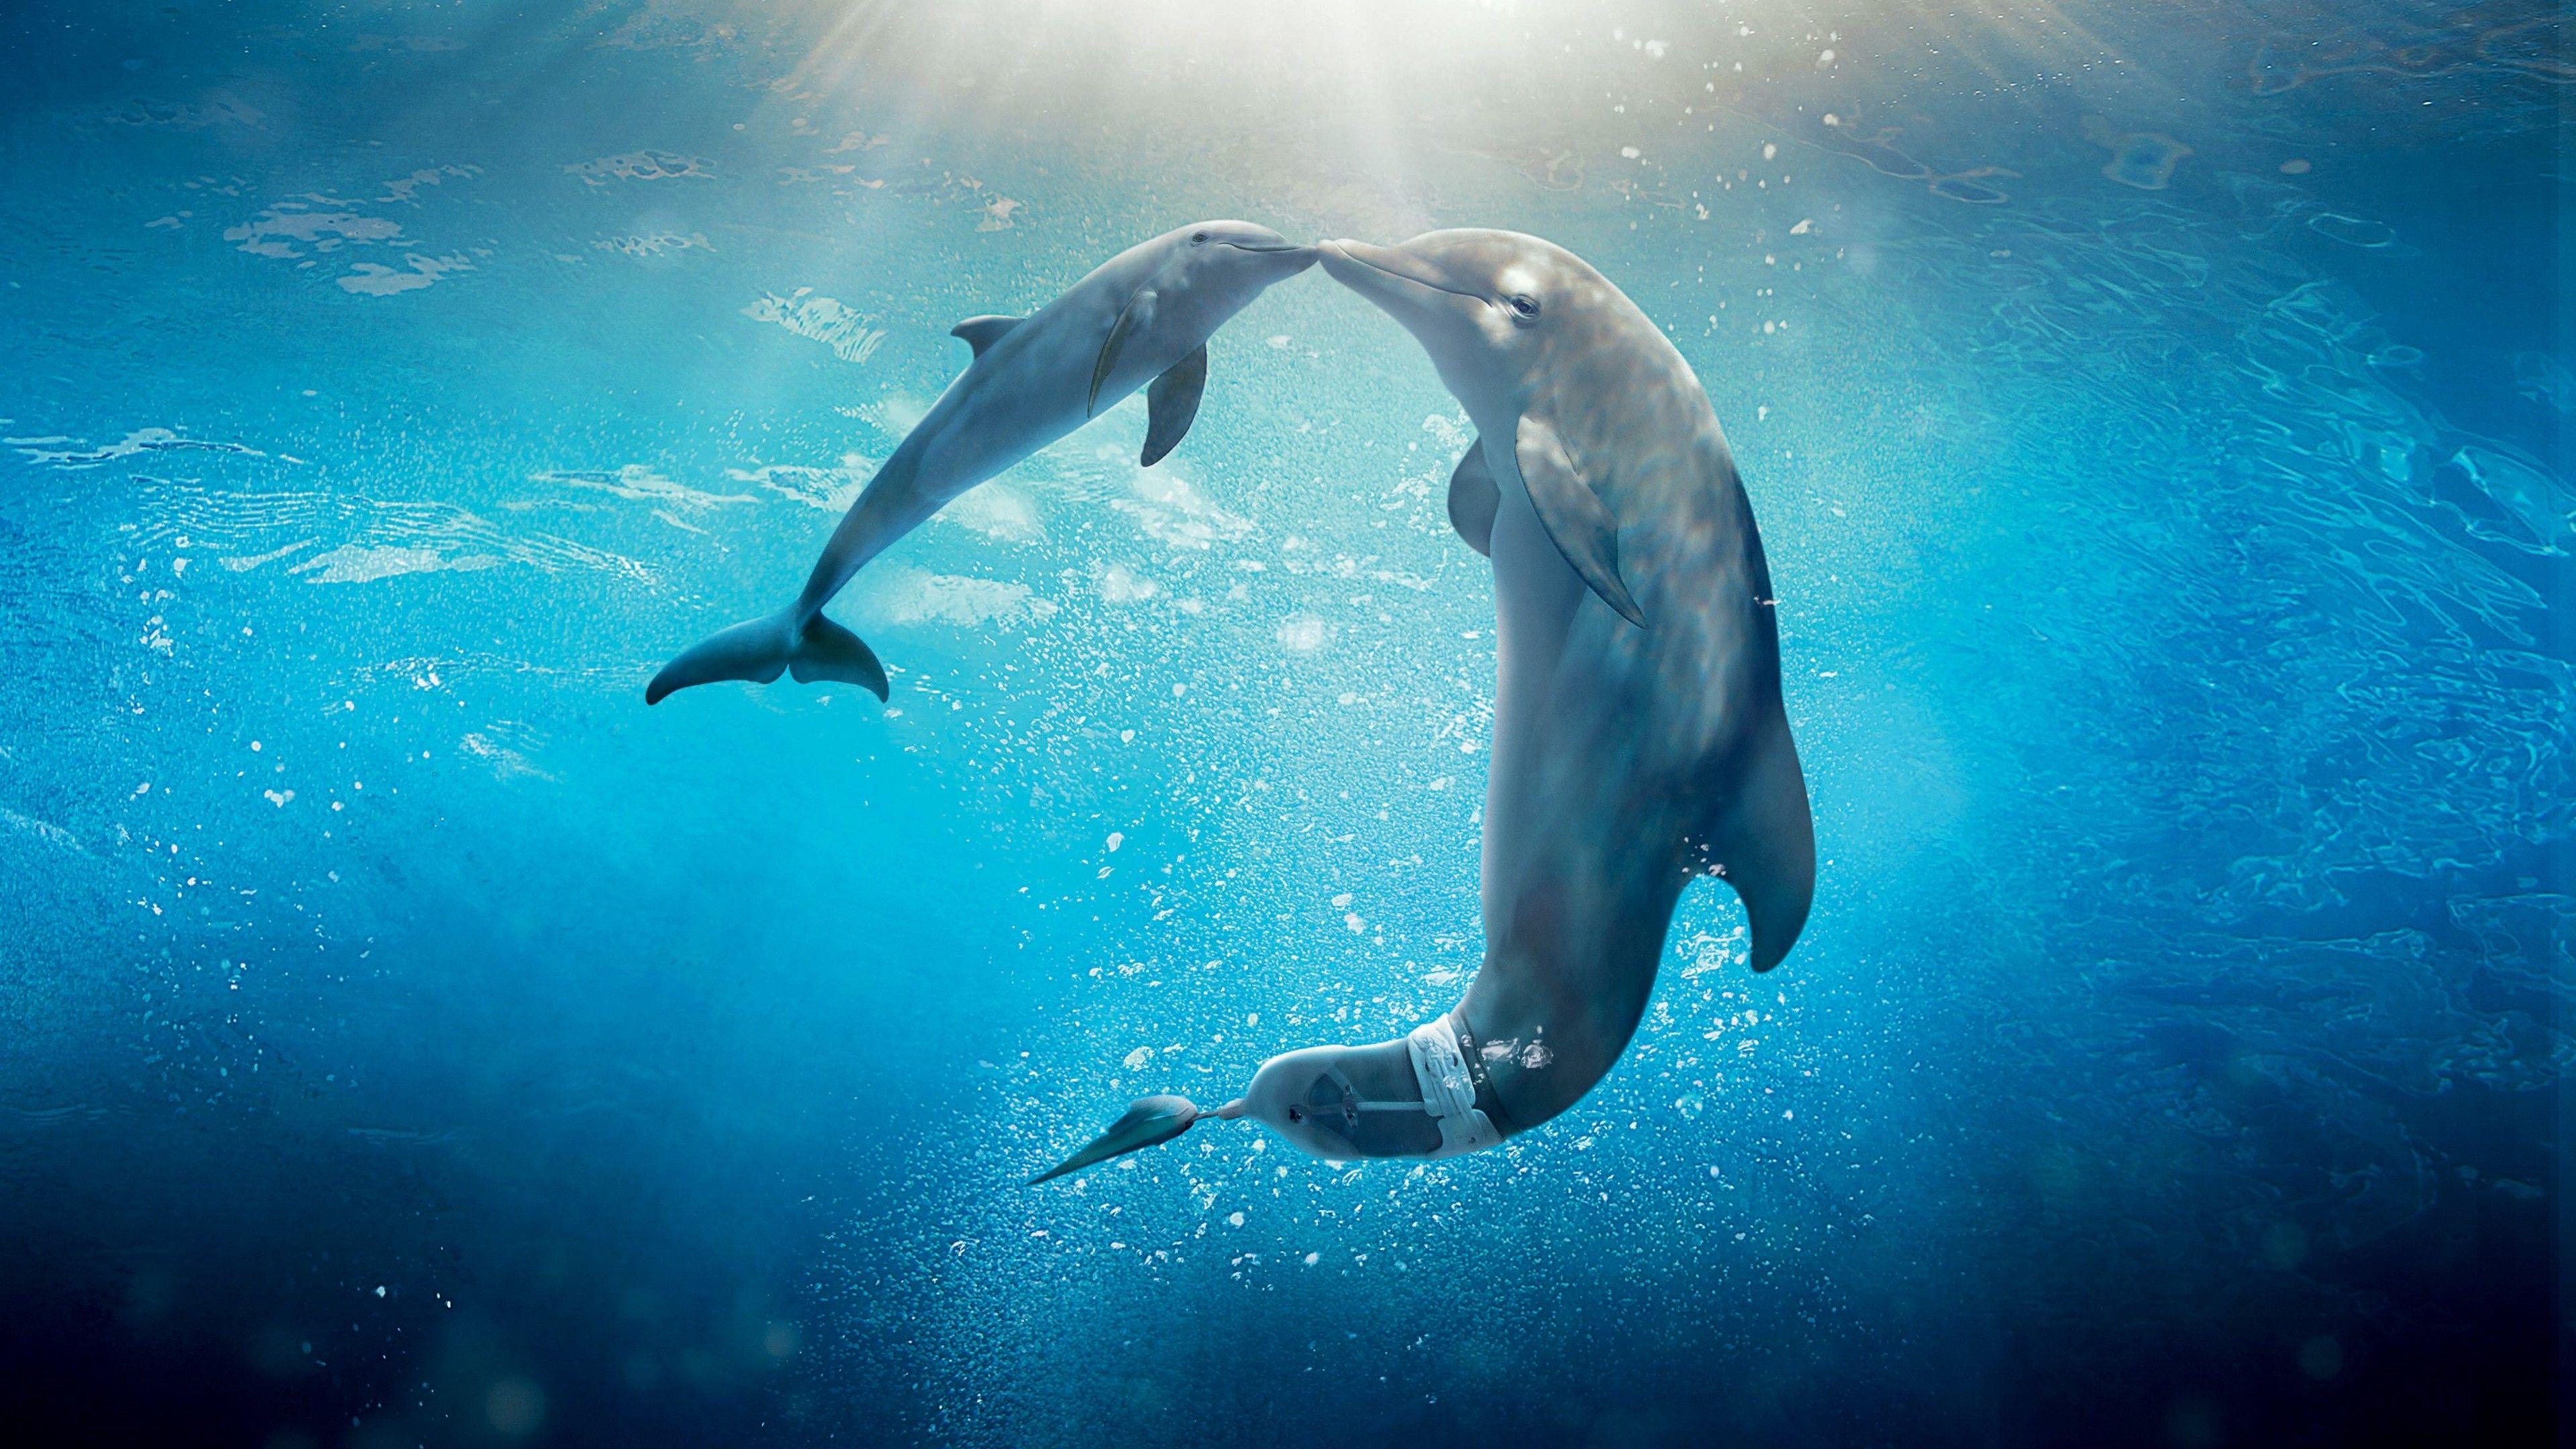 live animal dolphin wallpapers free download for pc